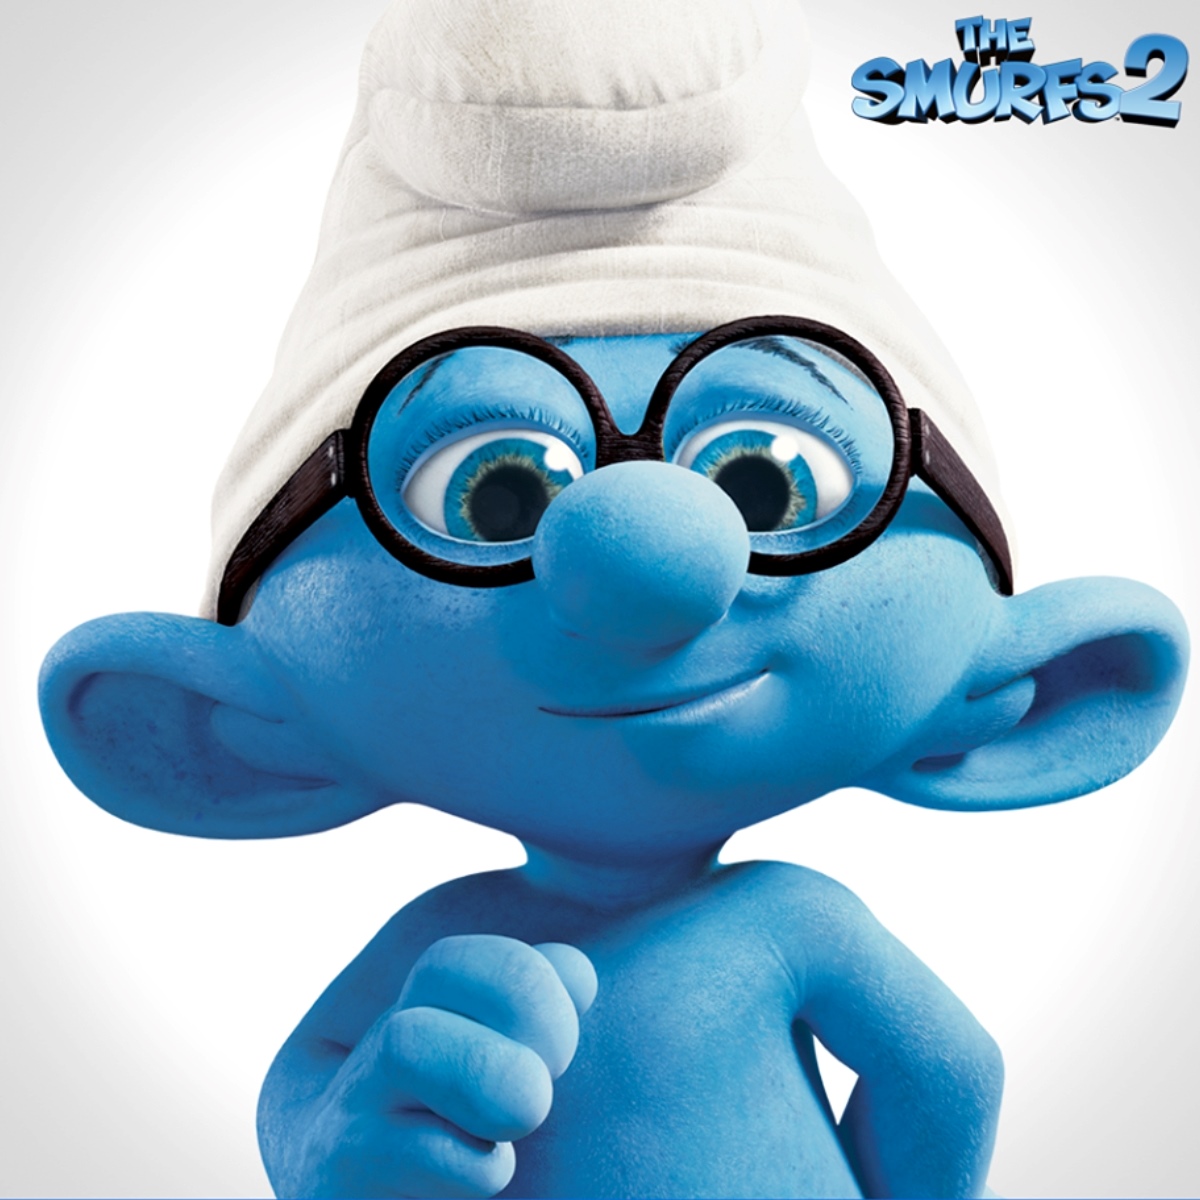 25-facts-about-brainy-smurf-the-smurfs